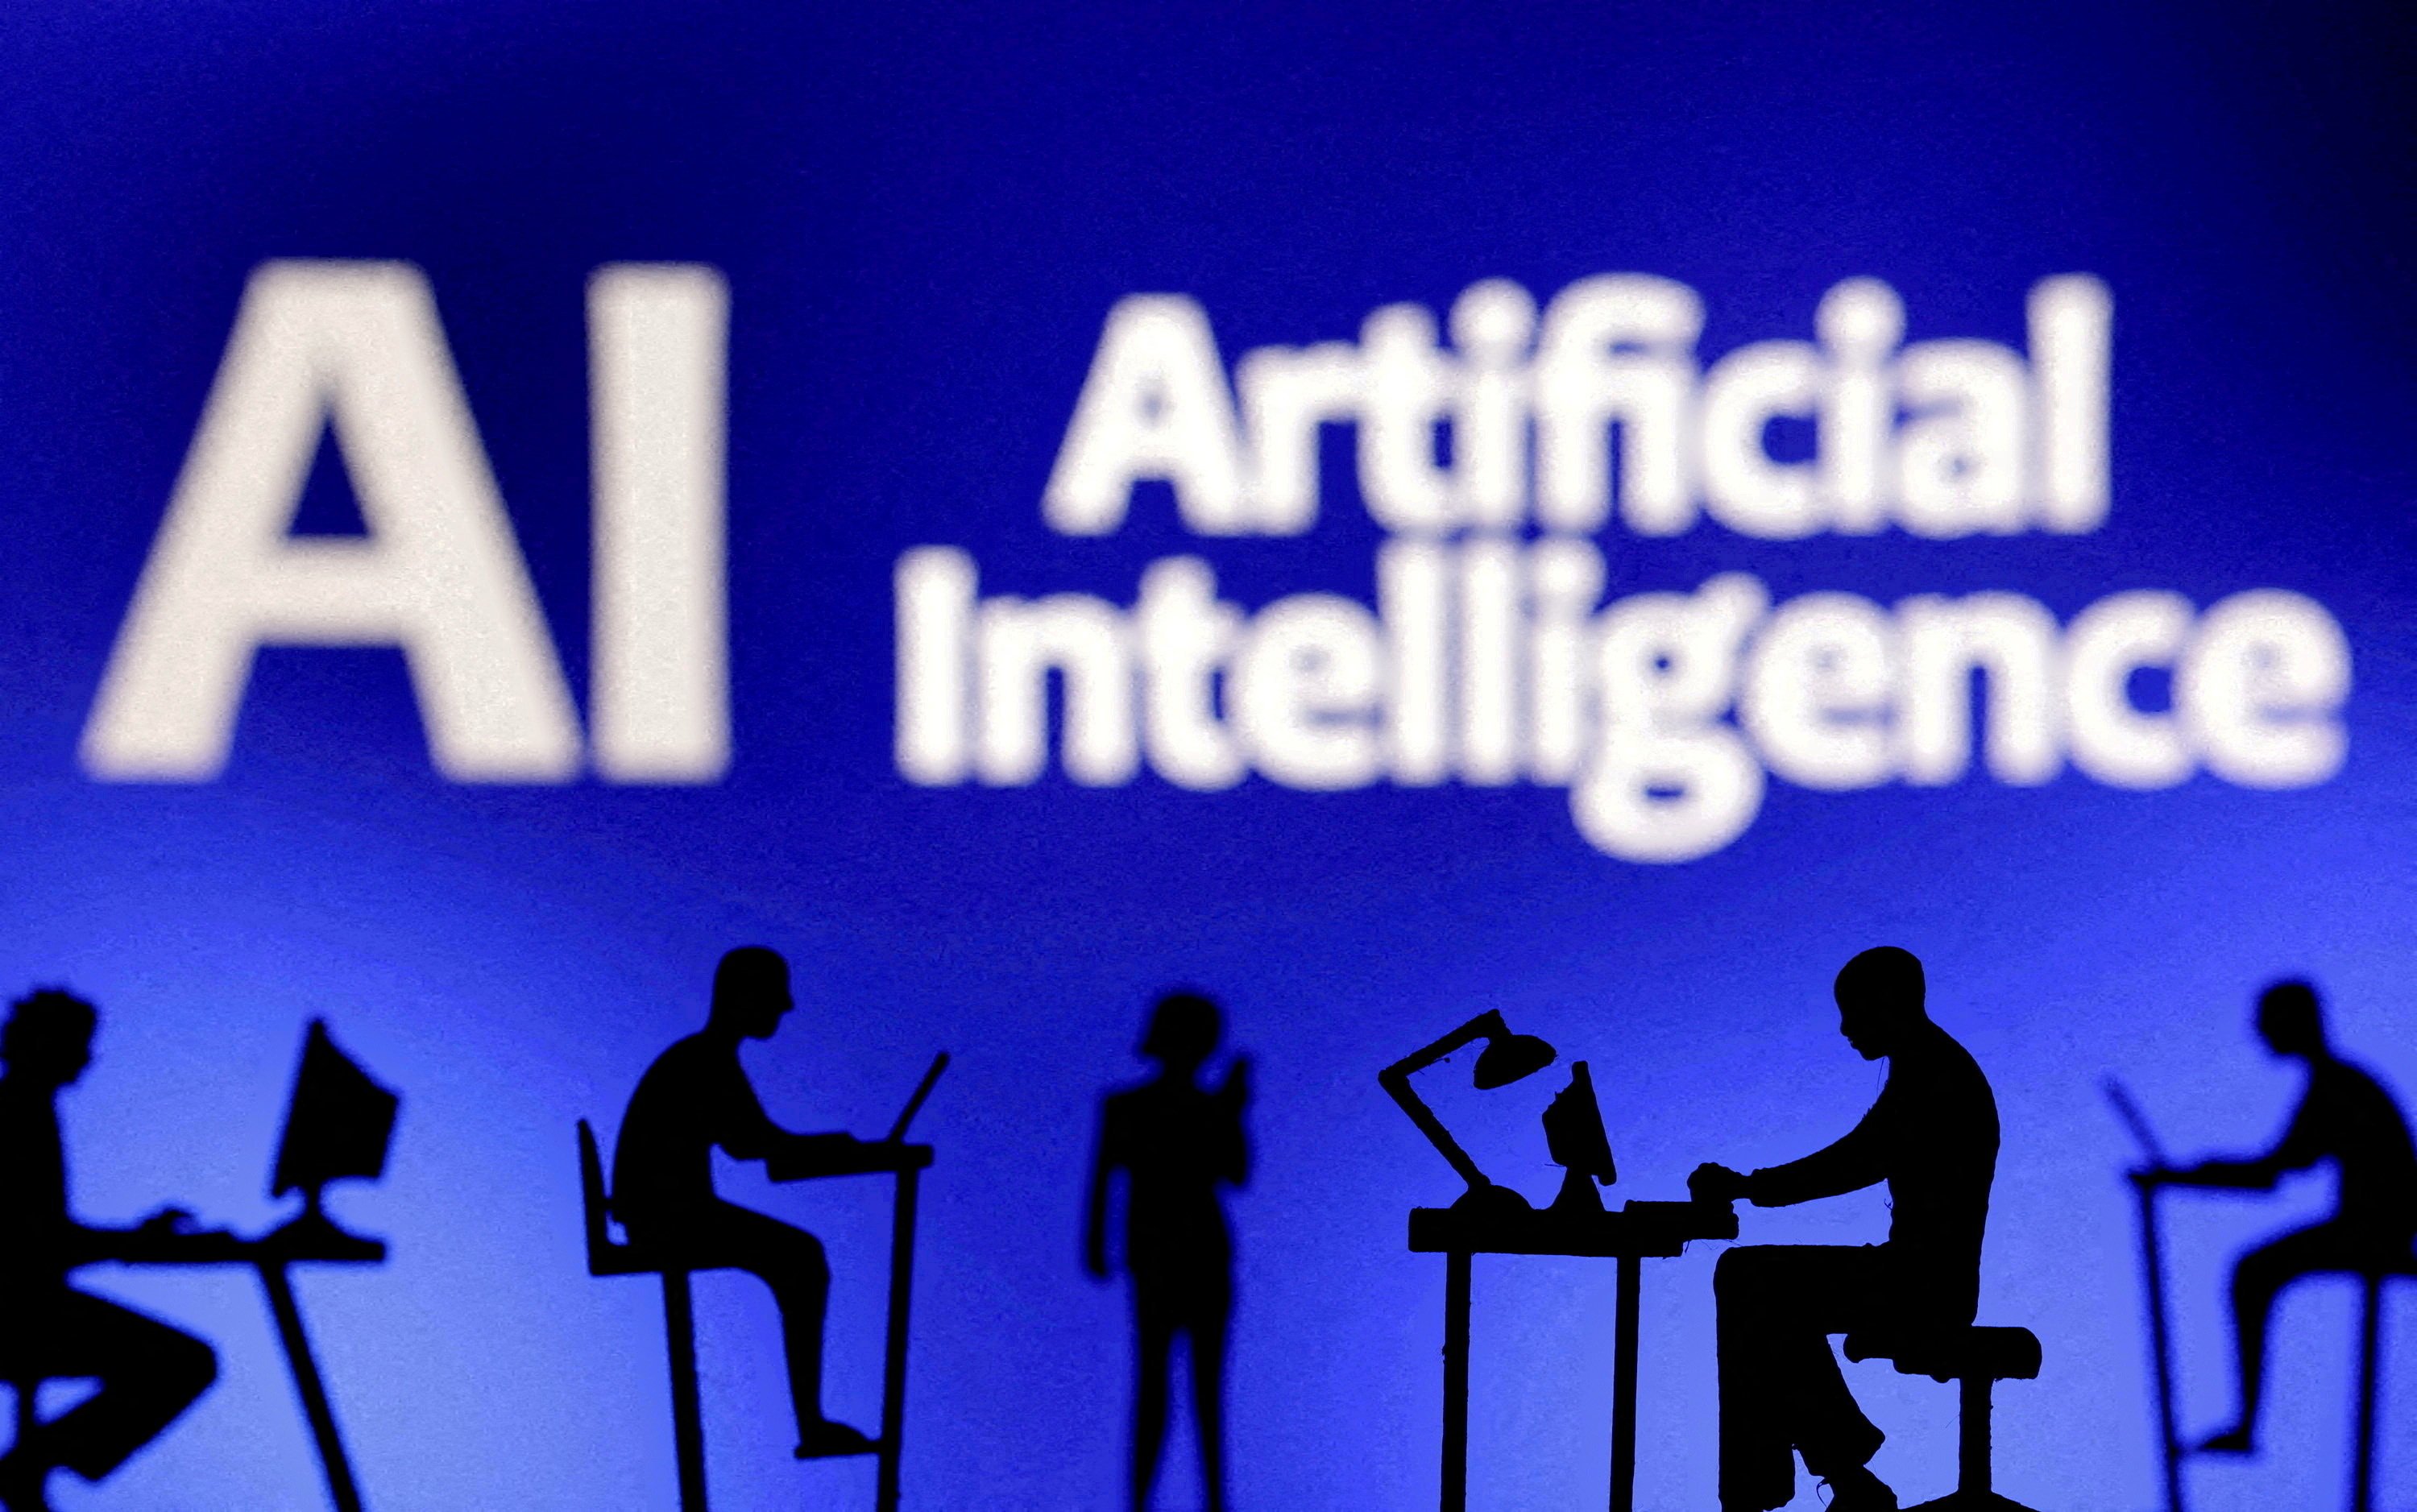 Figurines with computers and smartphones are seen in front of the words ‘Artificial Intelligence AI’ in this illustration taken on February 19, 2024. Photo: Reuters